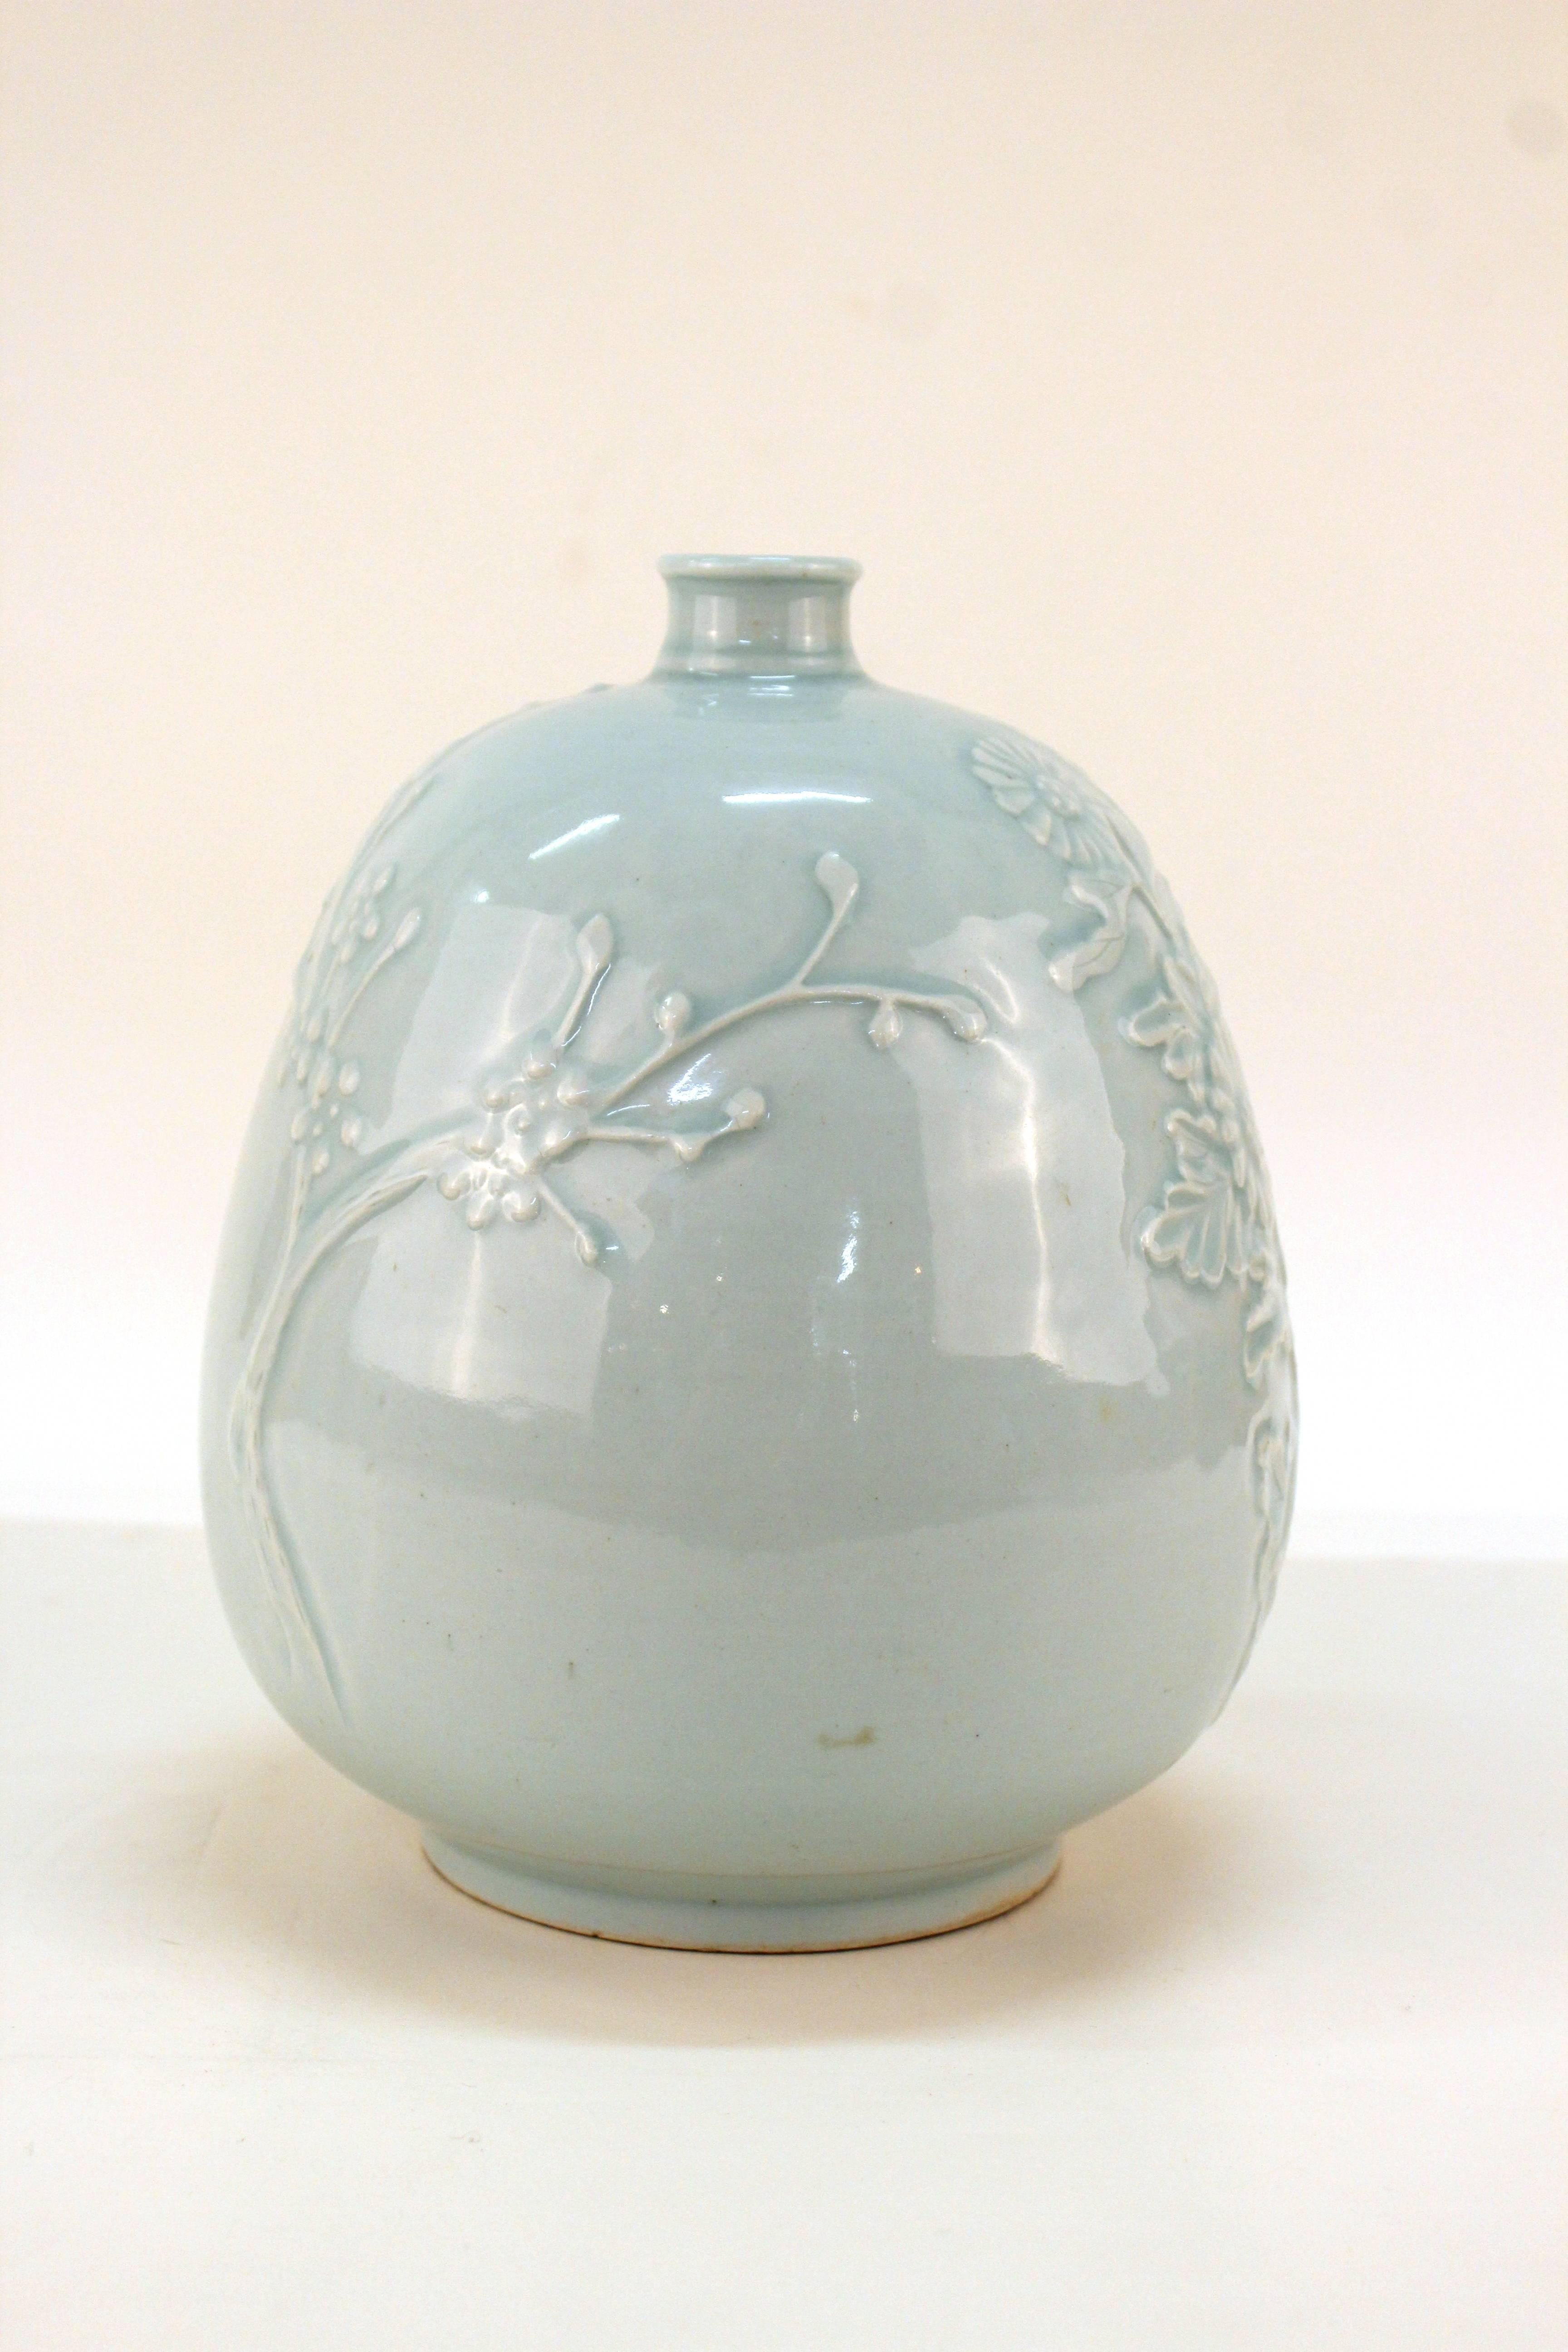 Pottery vase with celadon glaze from Korea. Decorated with had-applied raised cherry blossom branches and sprays of daisys. Has unknown makers mark. Wear consistent with age and use. The vase is in good condition.